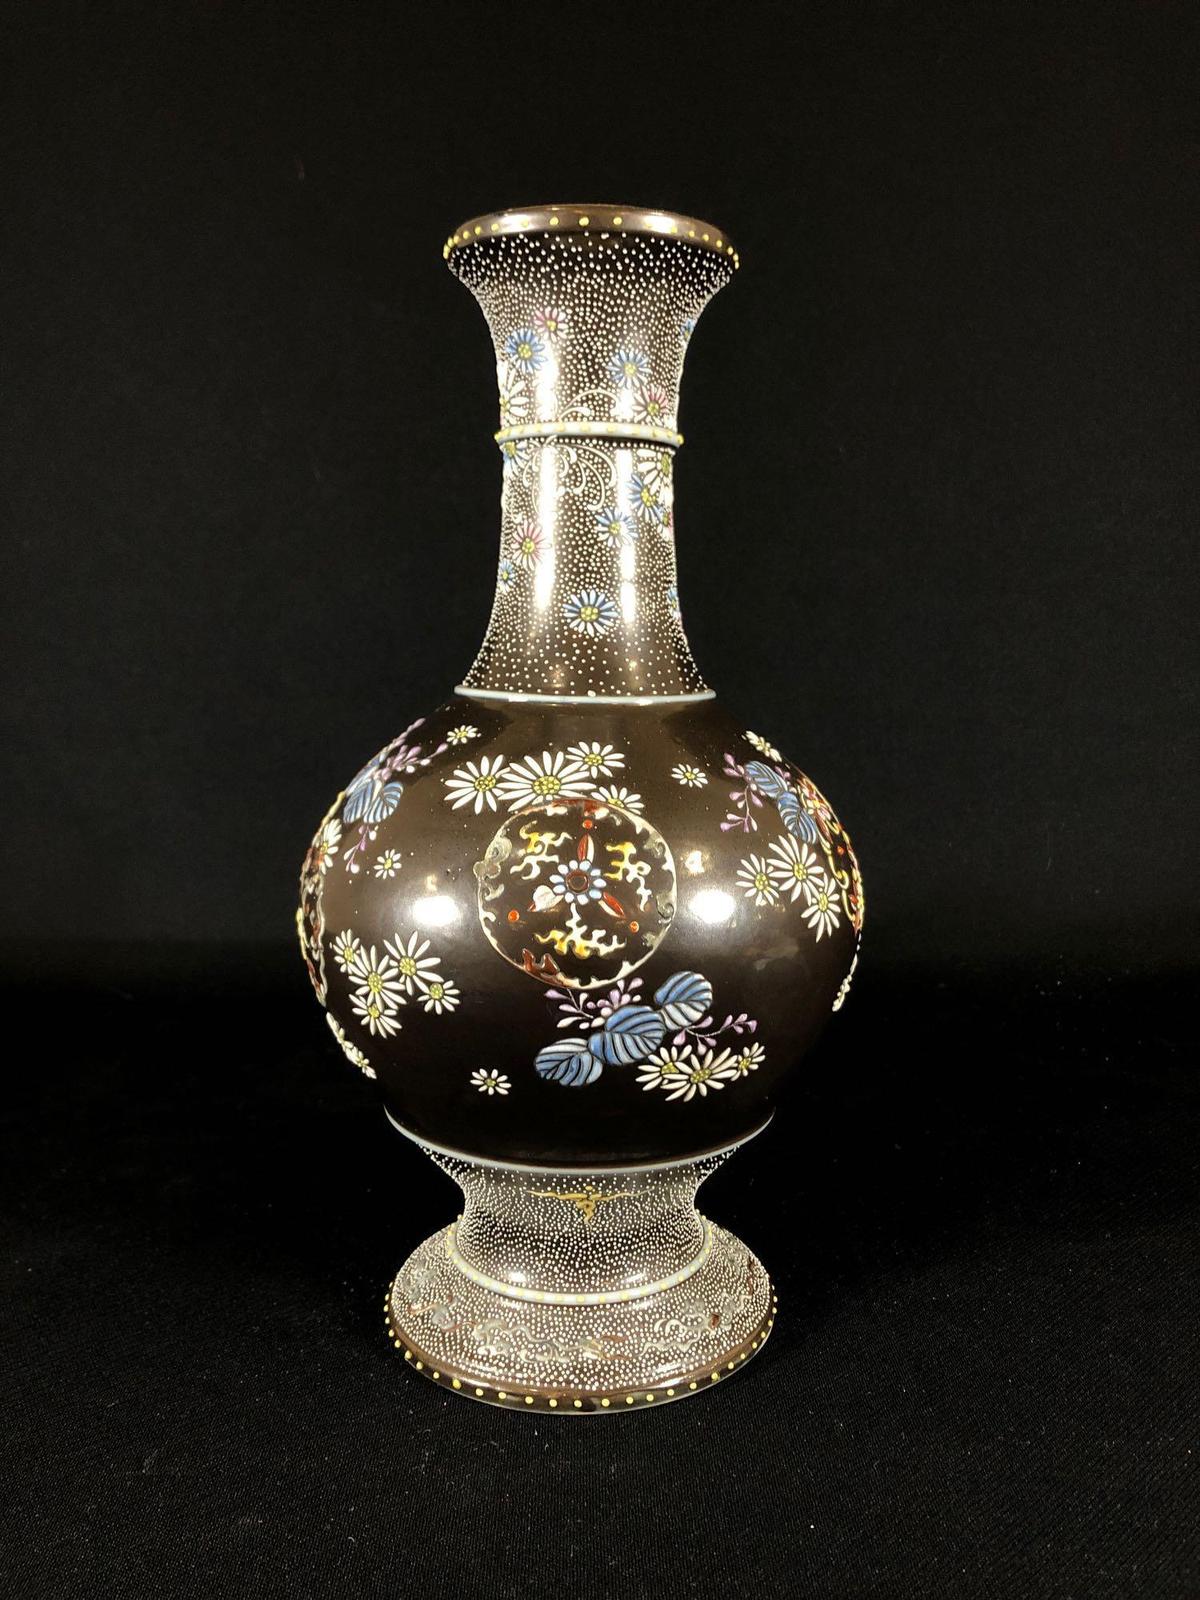 Japanese Nippon Ware Hand Painted Vase, Late 1800's Early 1900's, 12-1/4"h